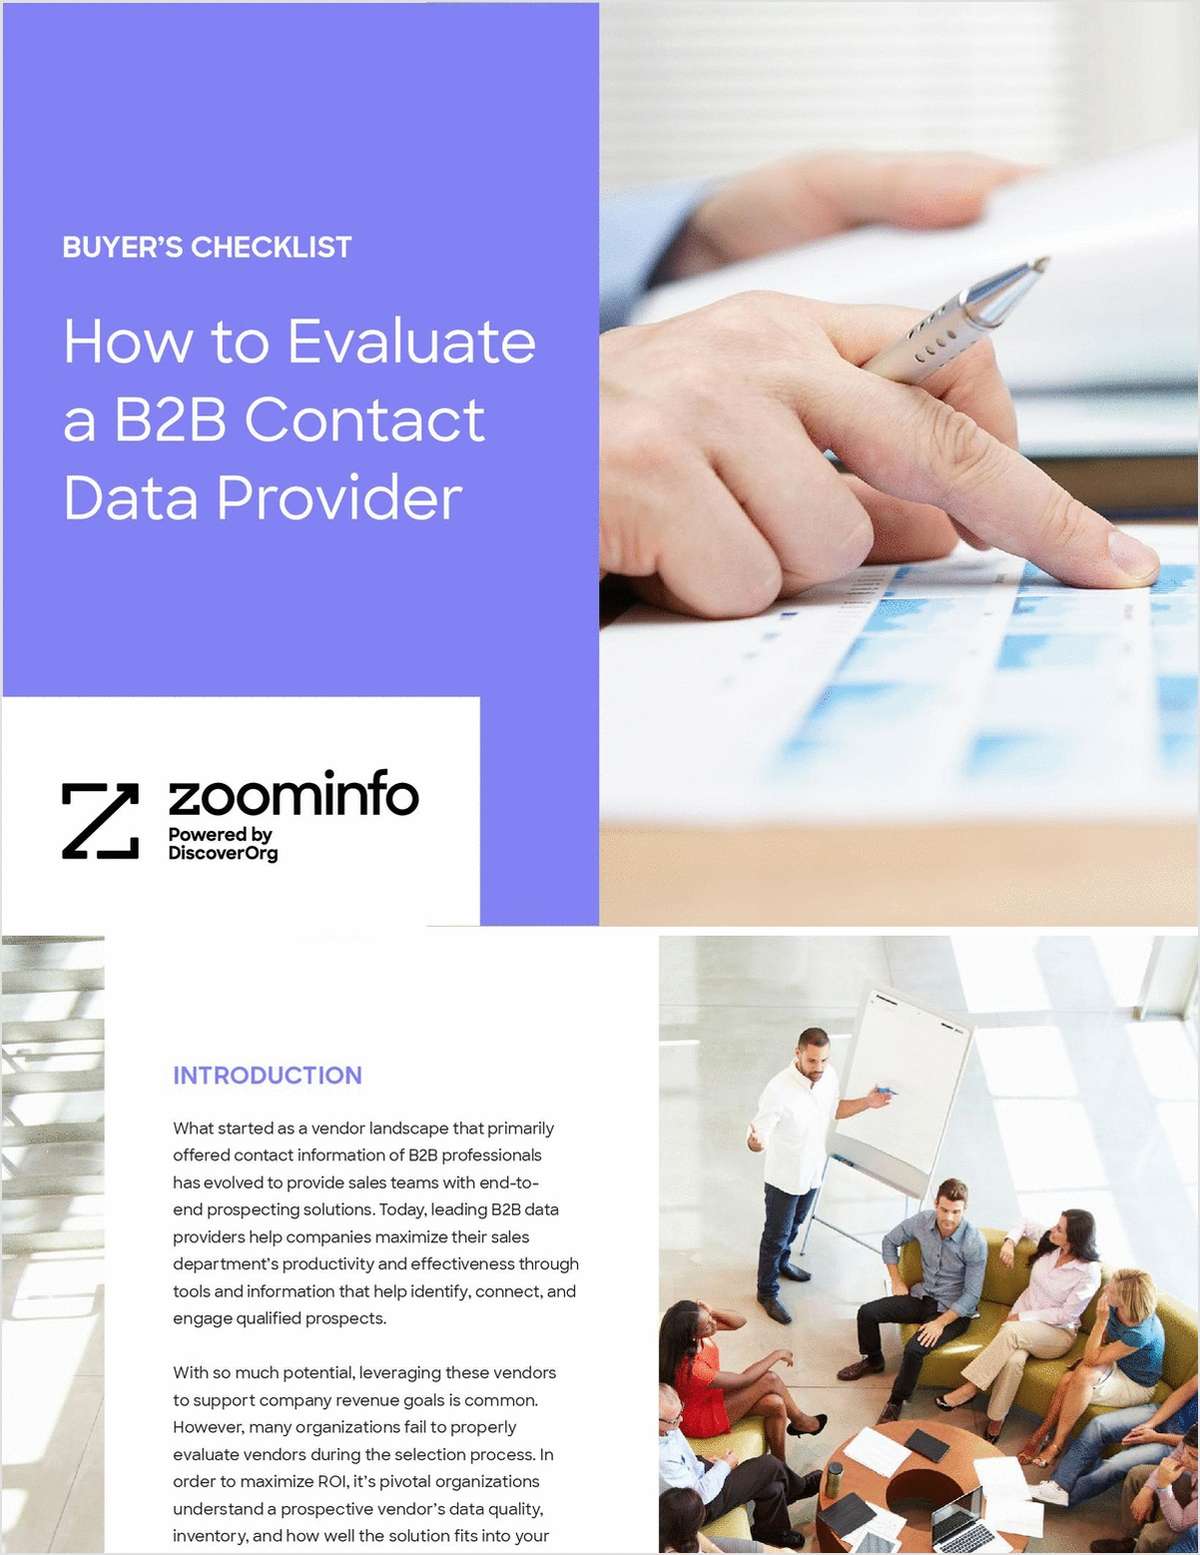 Buyer's Checklist: How to Evaluate B2B Contact Data Provider